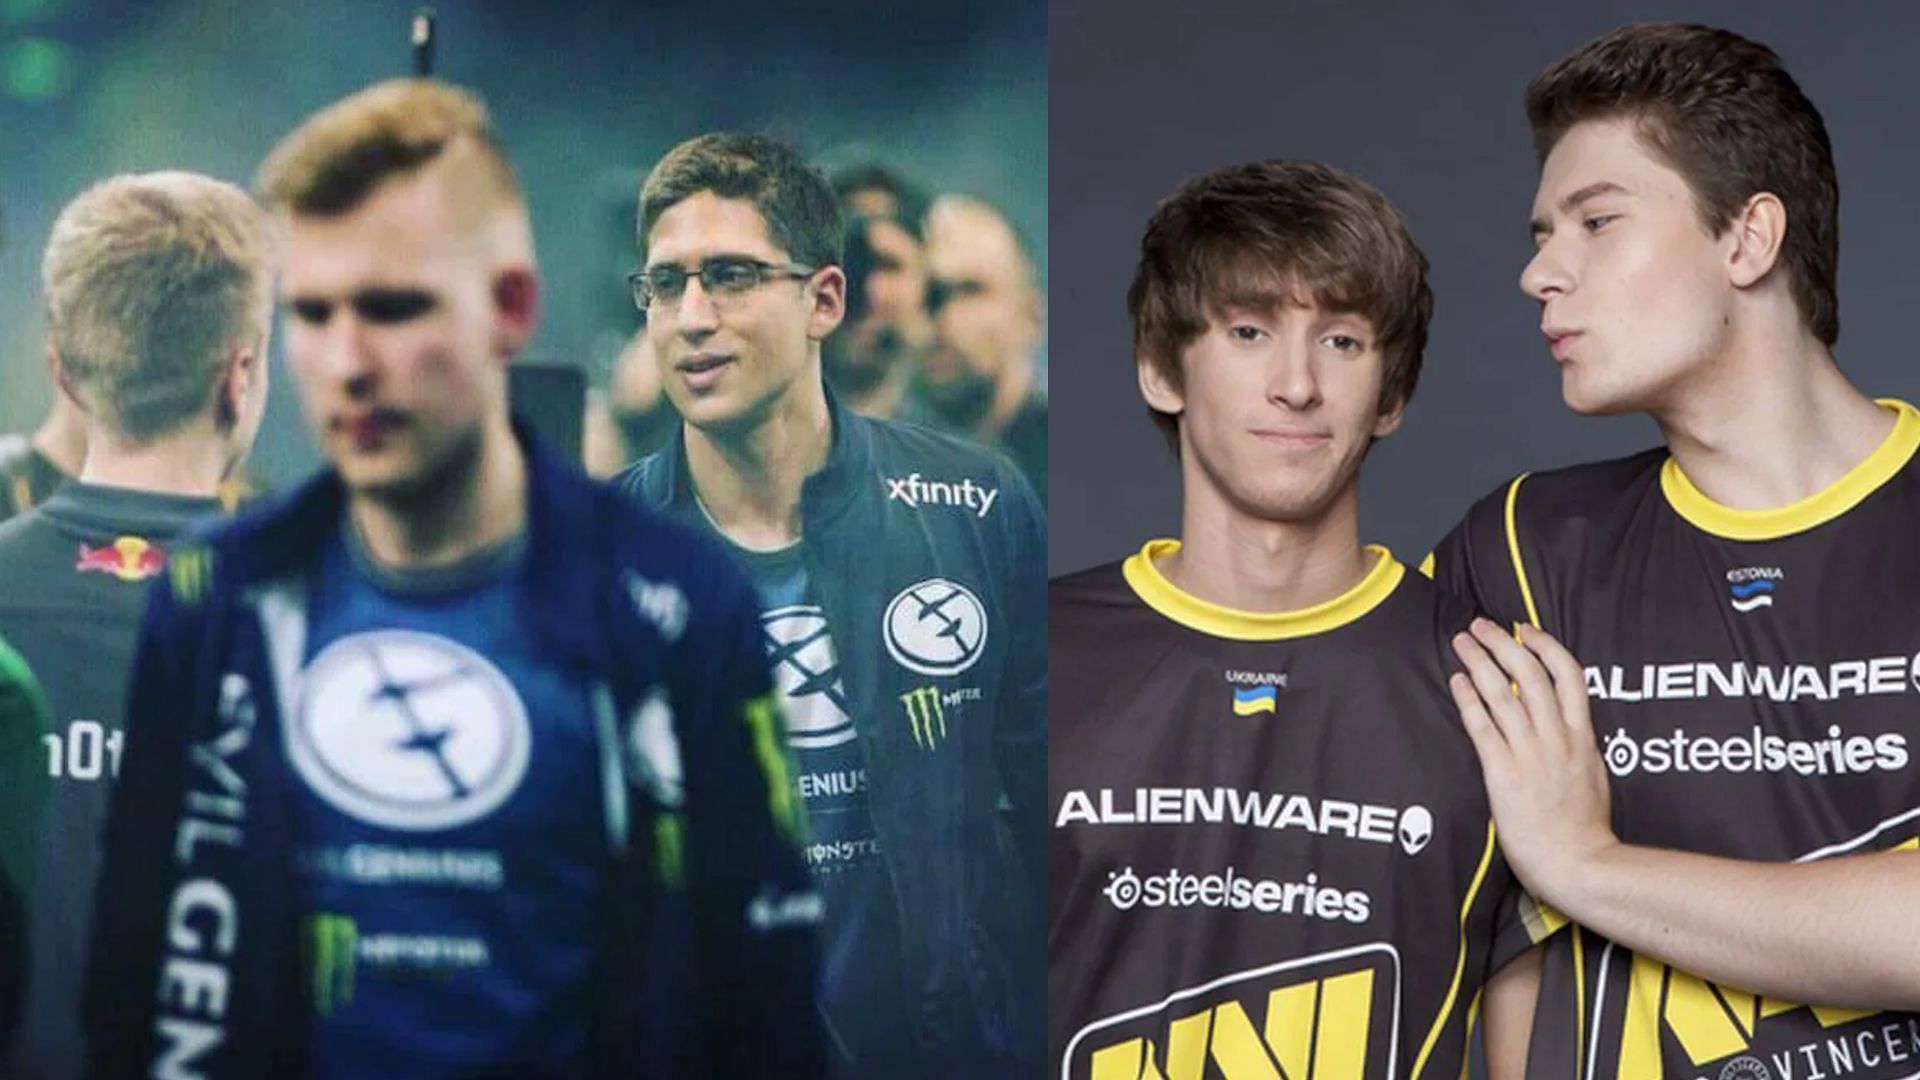 Fly-N0tail rivalry on the left, Puppey-Dendi bromance on the right